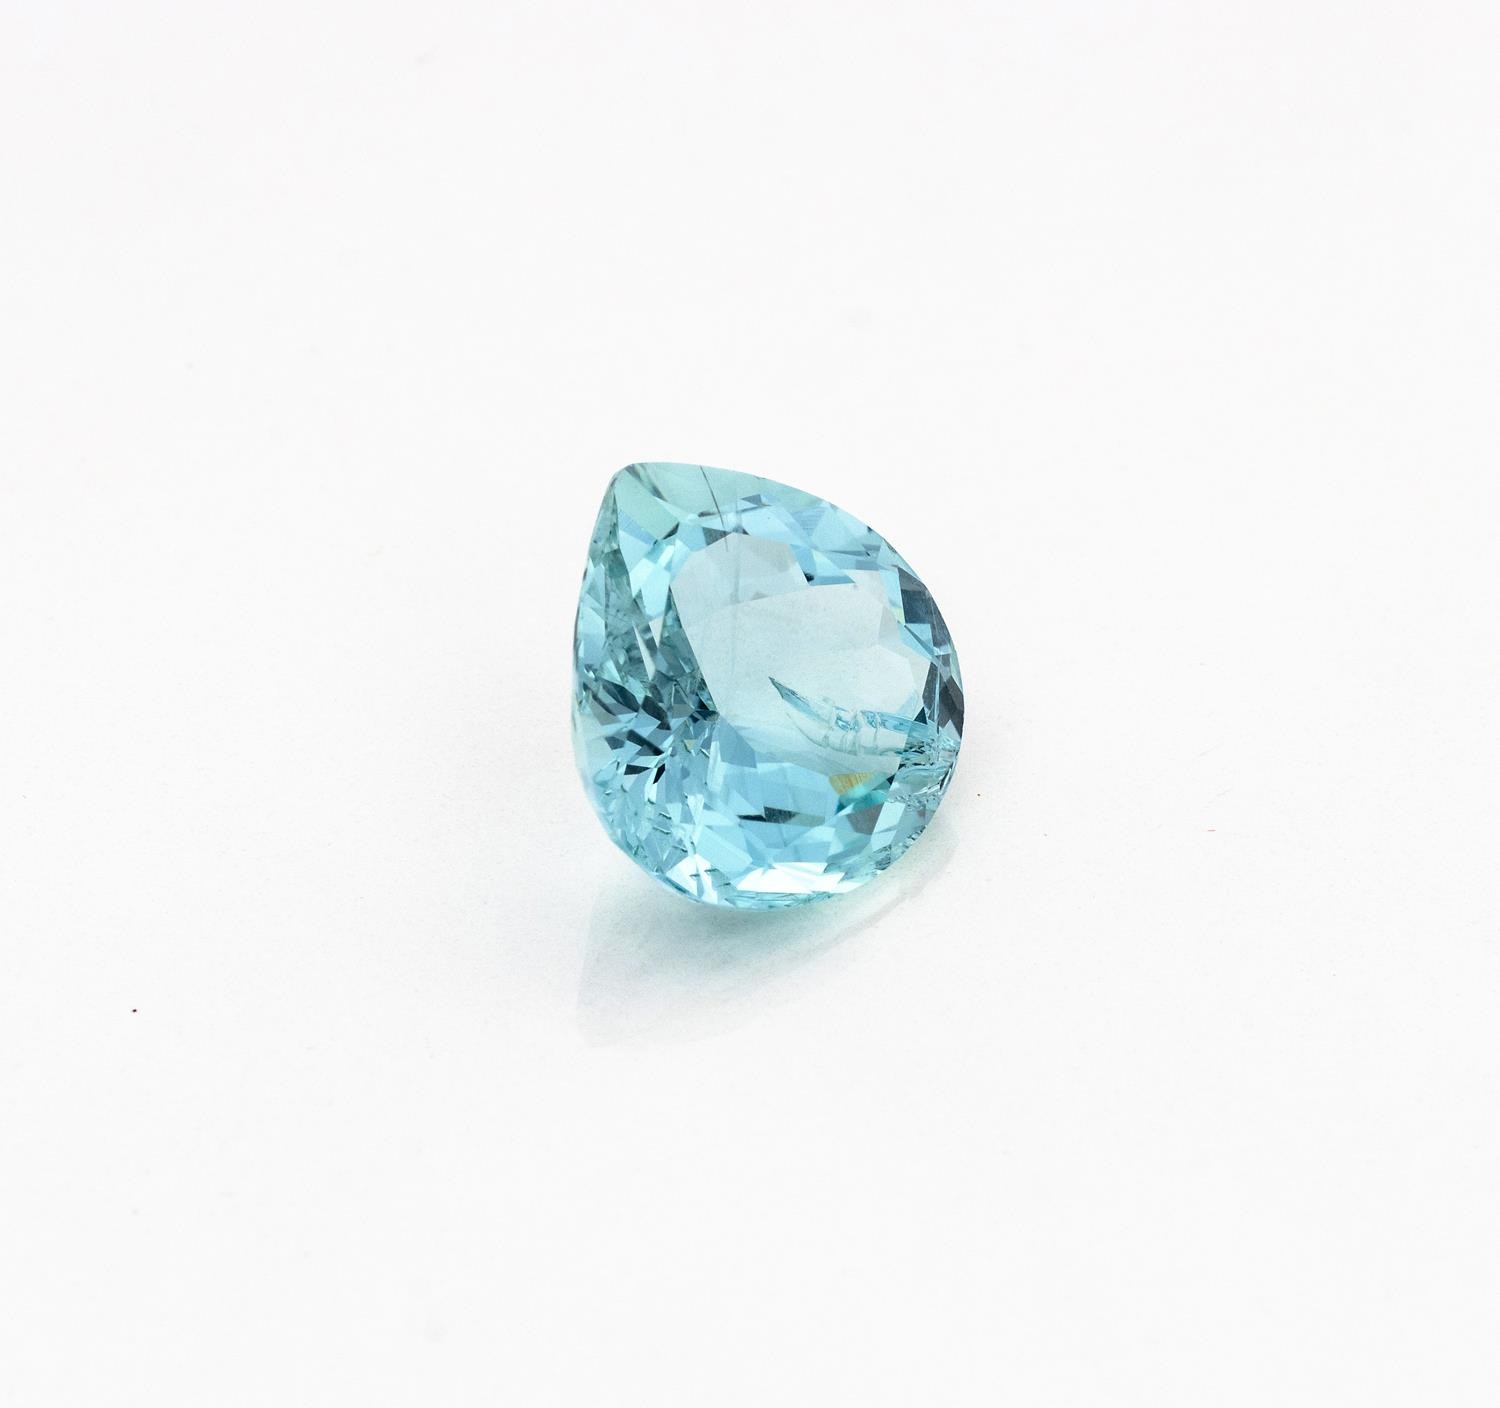 AN UNMOUNTED PEAR-SHAPED AQUAMARINE - Image 3 of 3